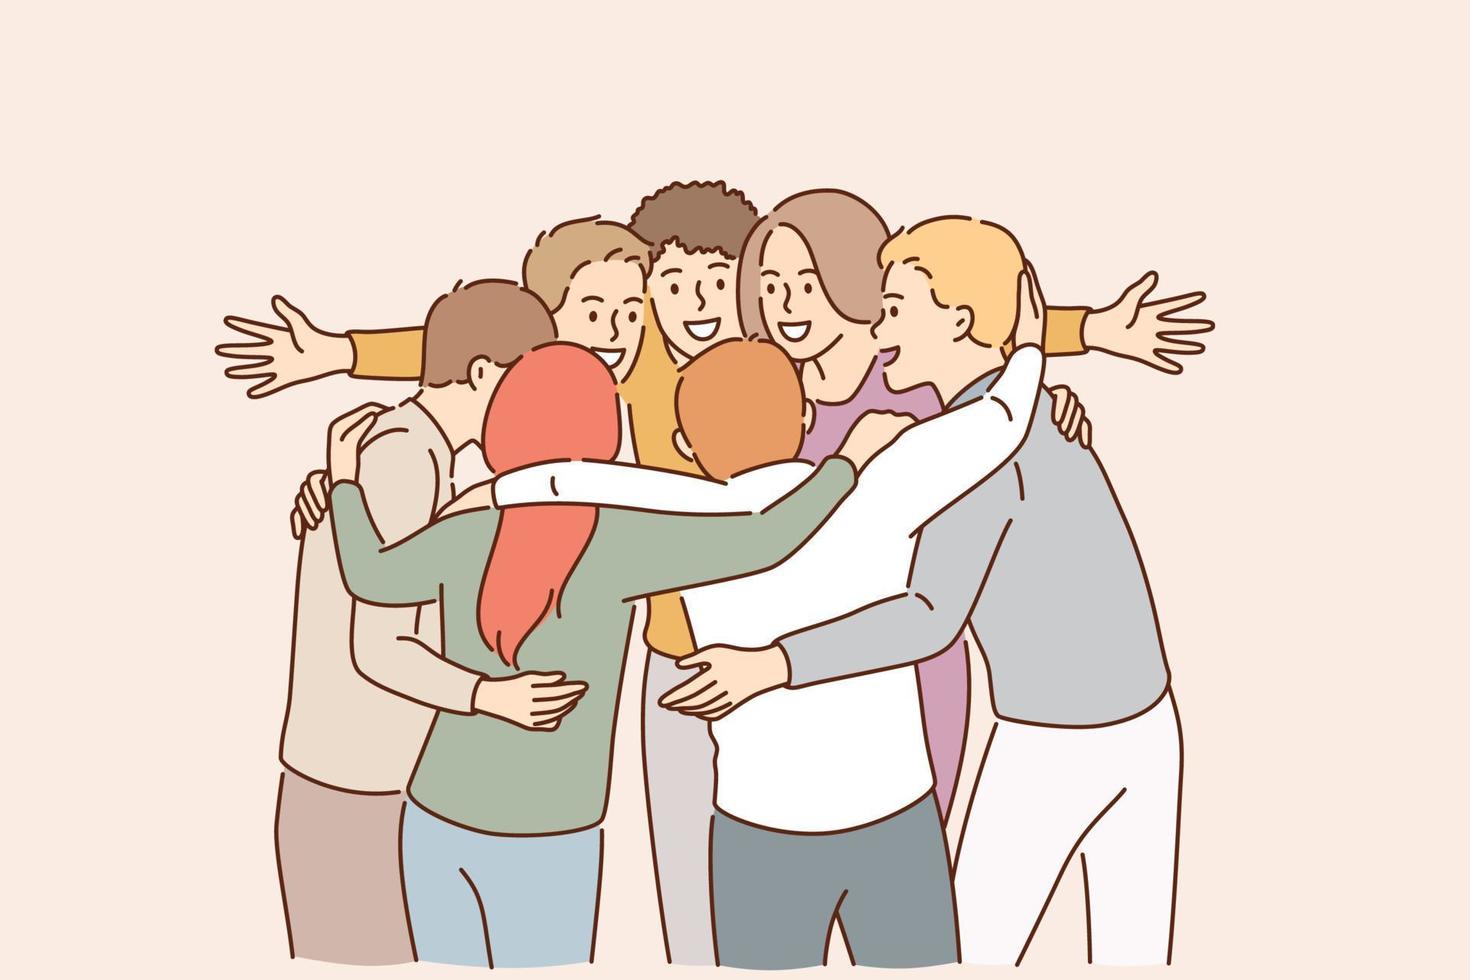 Team, leadership, win concept. Group of young smiling people business partners workers colleagues clerks hugging celebrating business success together in office vector illustration